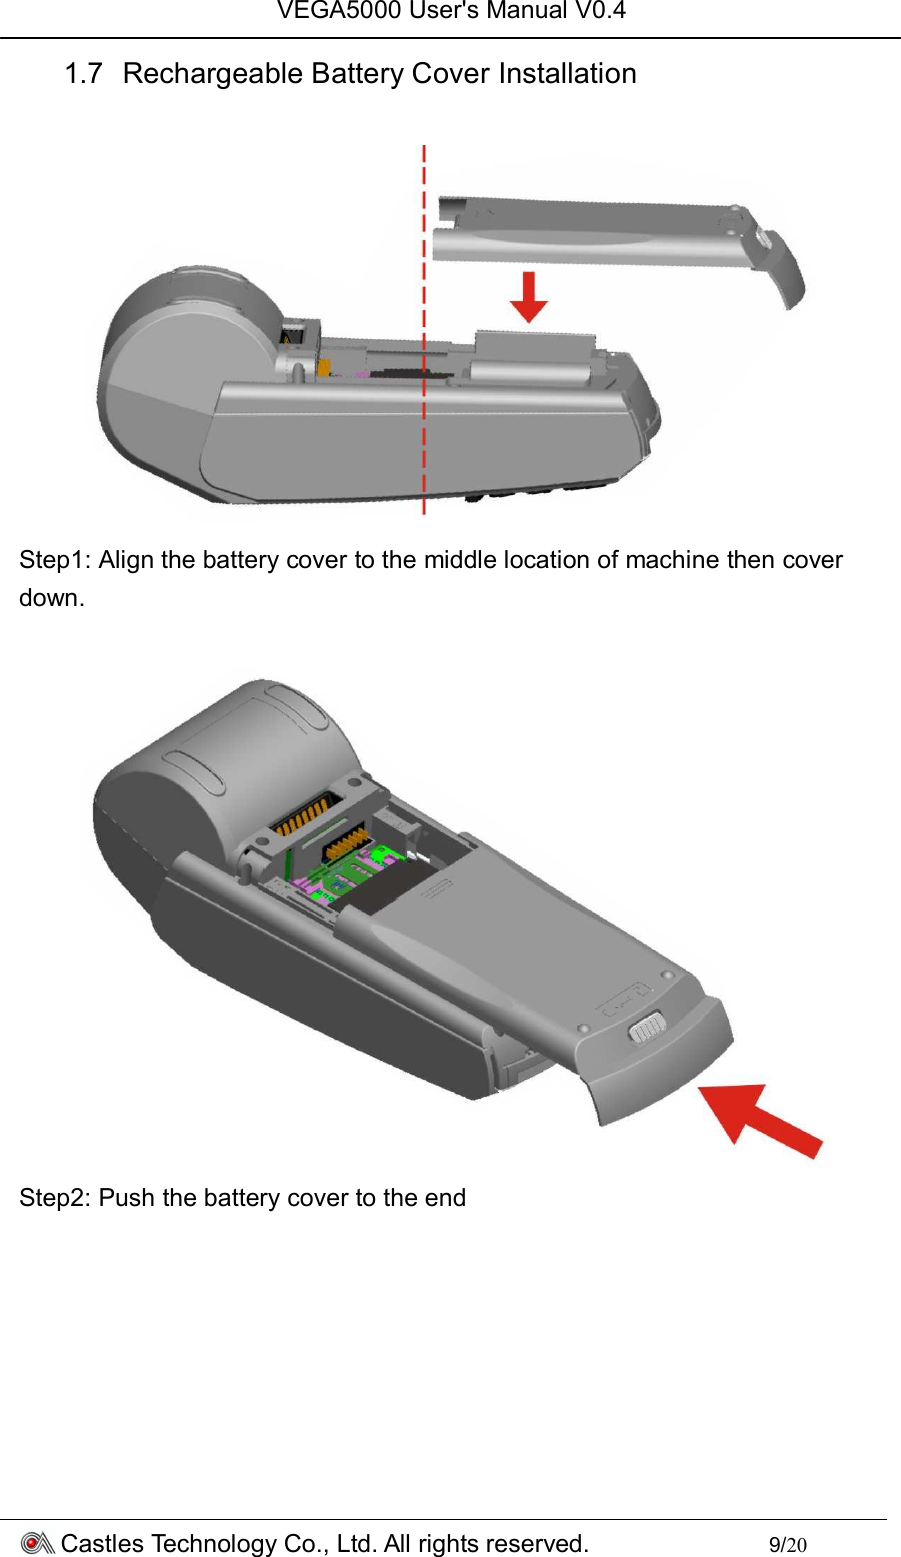 VEGA5000 User&apos;s Manual V0.4 Castles Technology Co., Ltd. All rights reserved.        9/20 1.7  Rechargeable Battery Cover Installation   Step1: Align the battery cover to the middle location of machine then cover down.   Step2: Push the battery cover to the end  